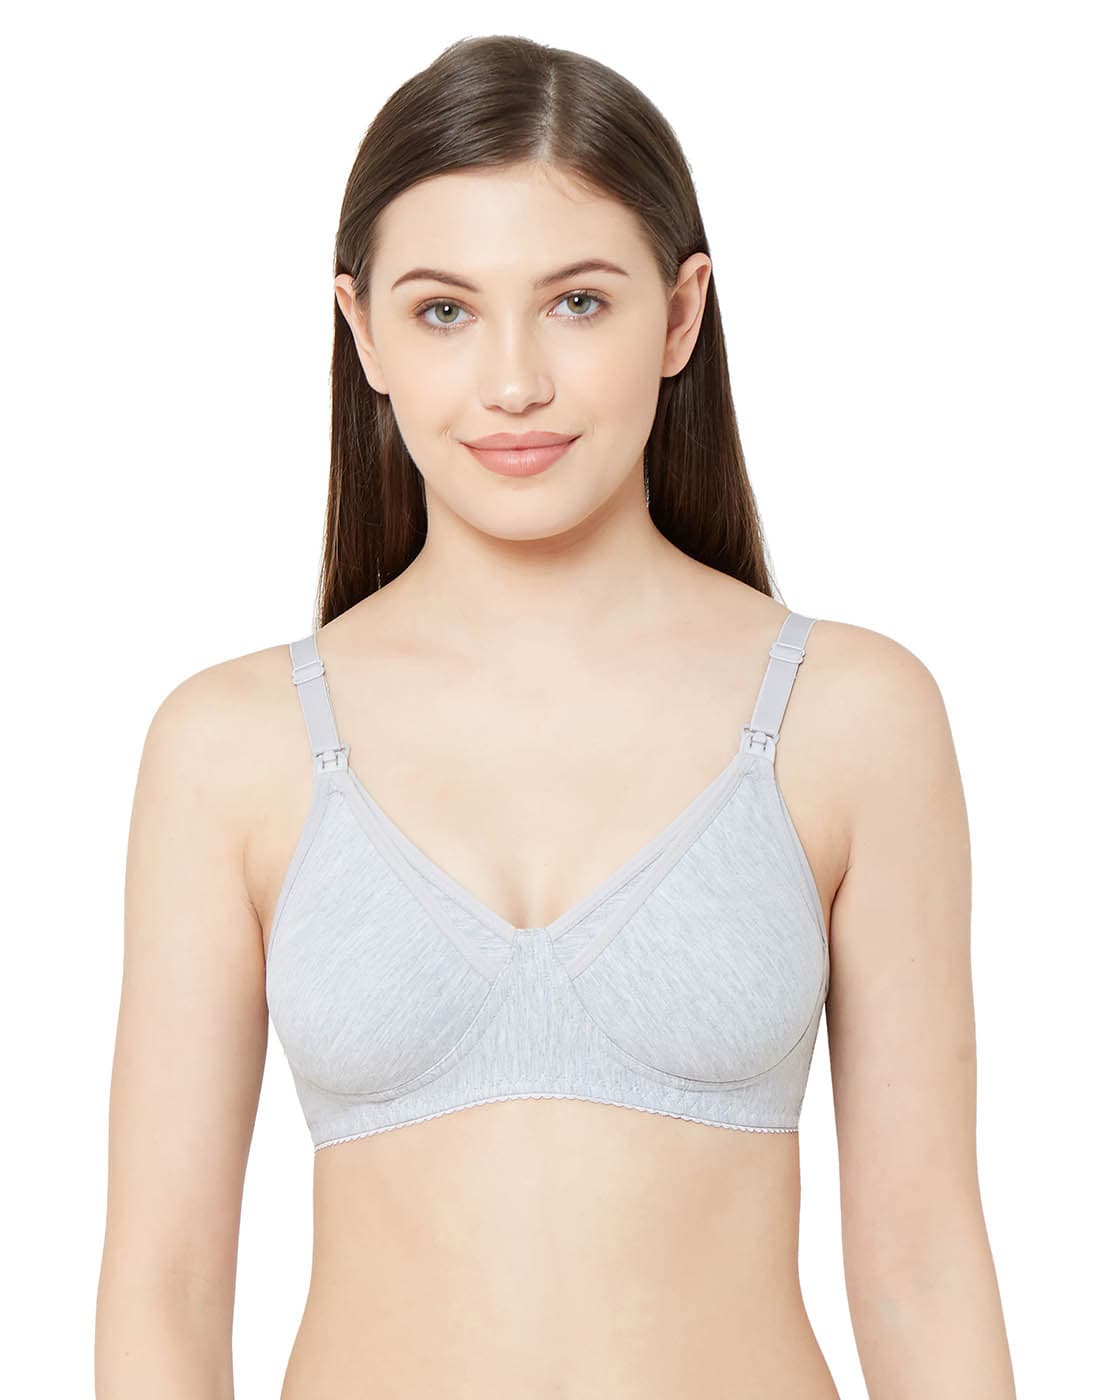 Buy CEE 18 Women's Cotton Non Padded Non-Wired Maternity Bra